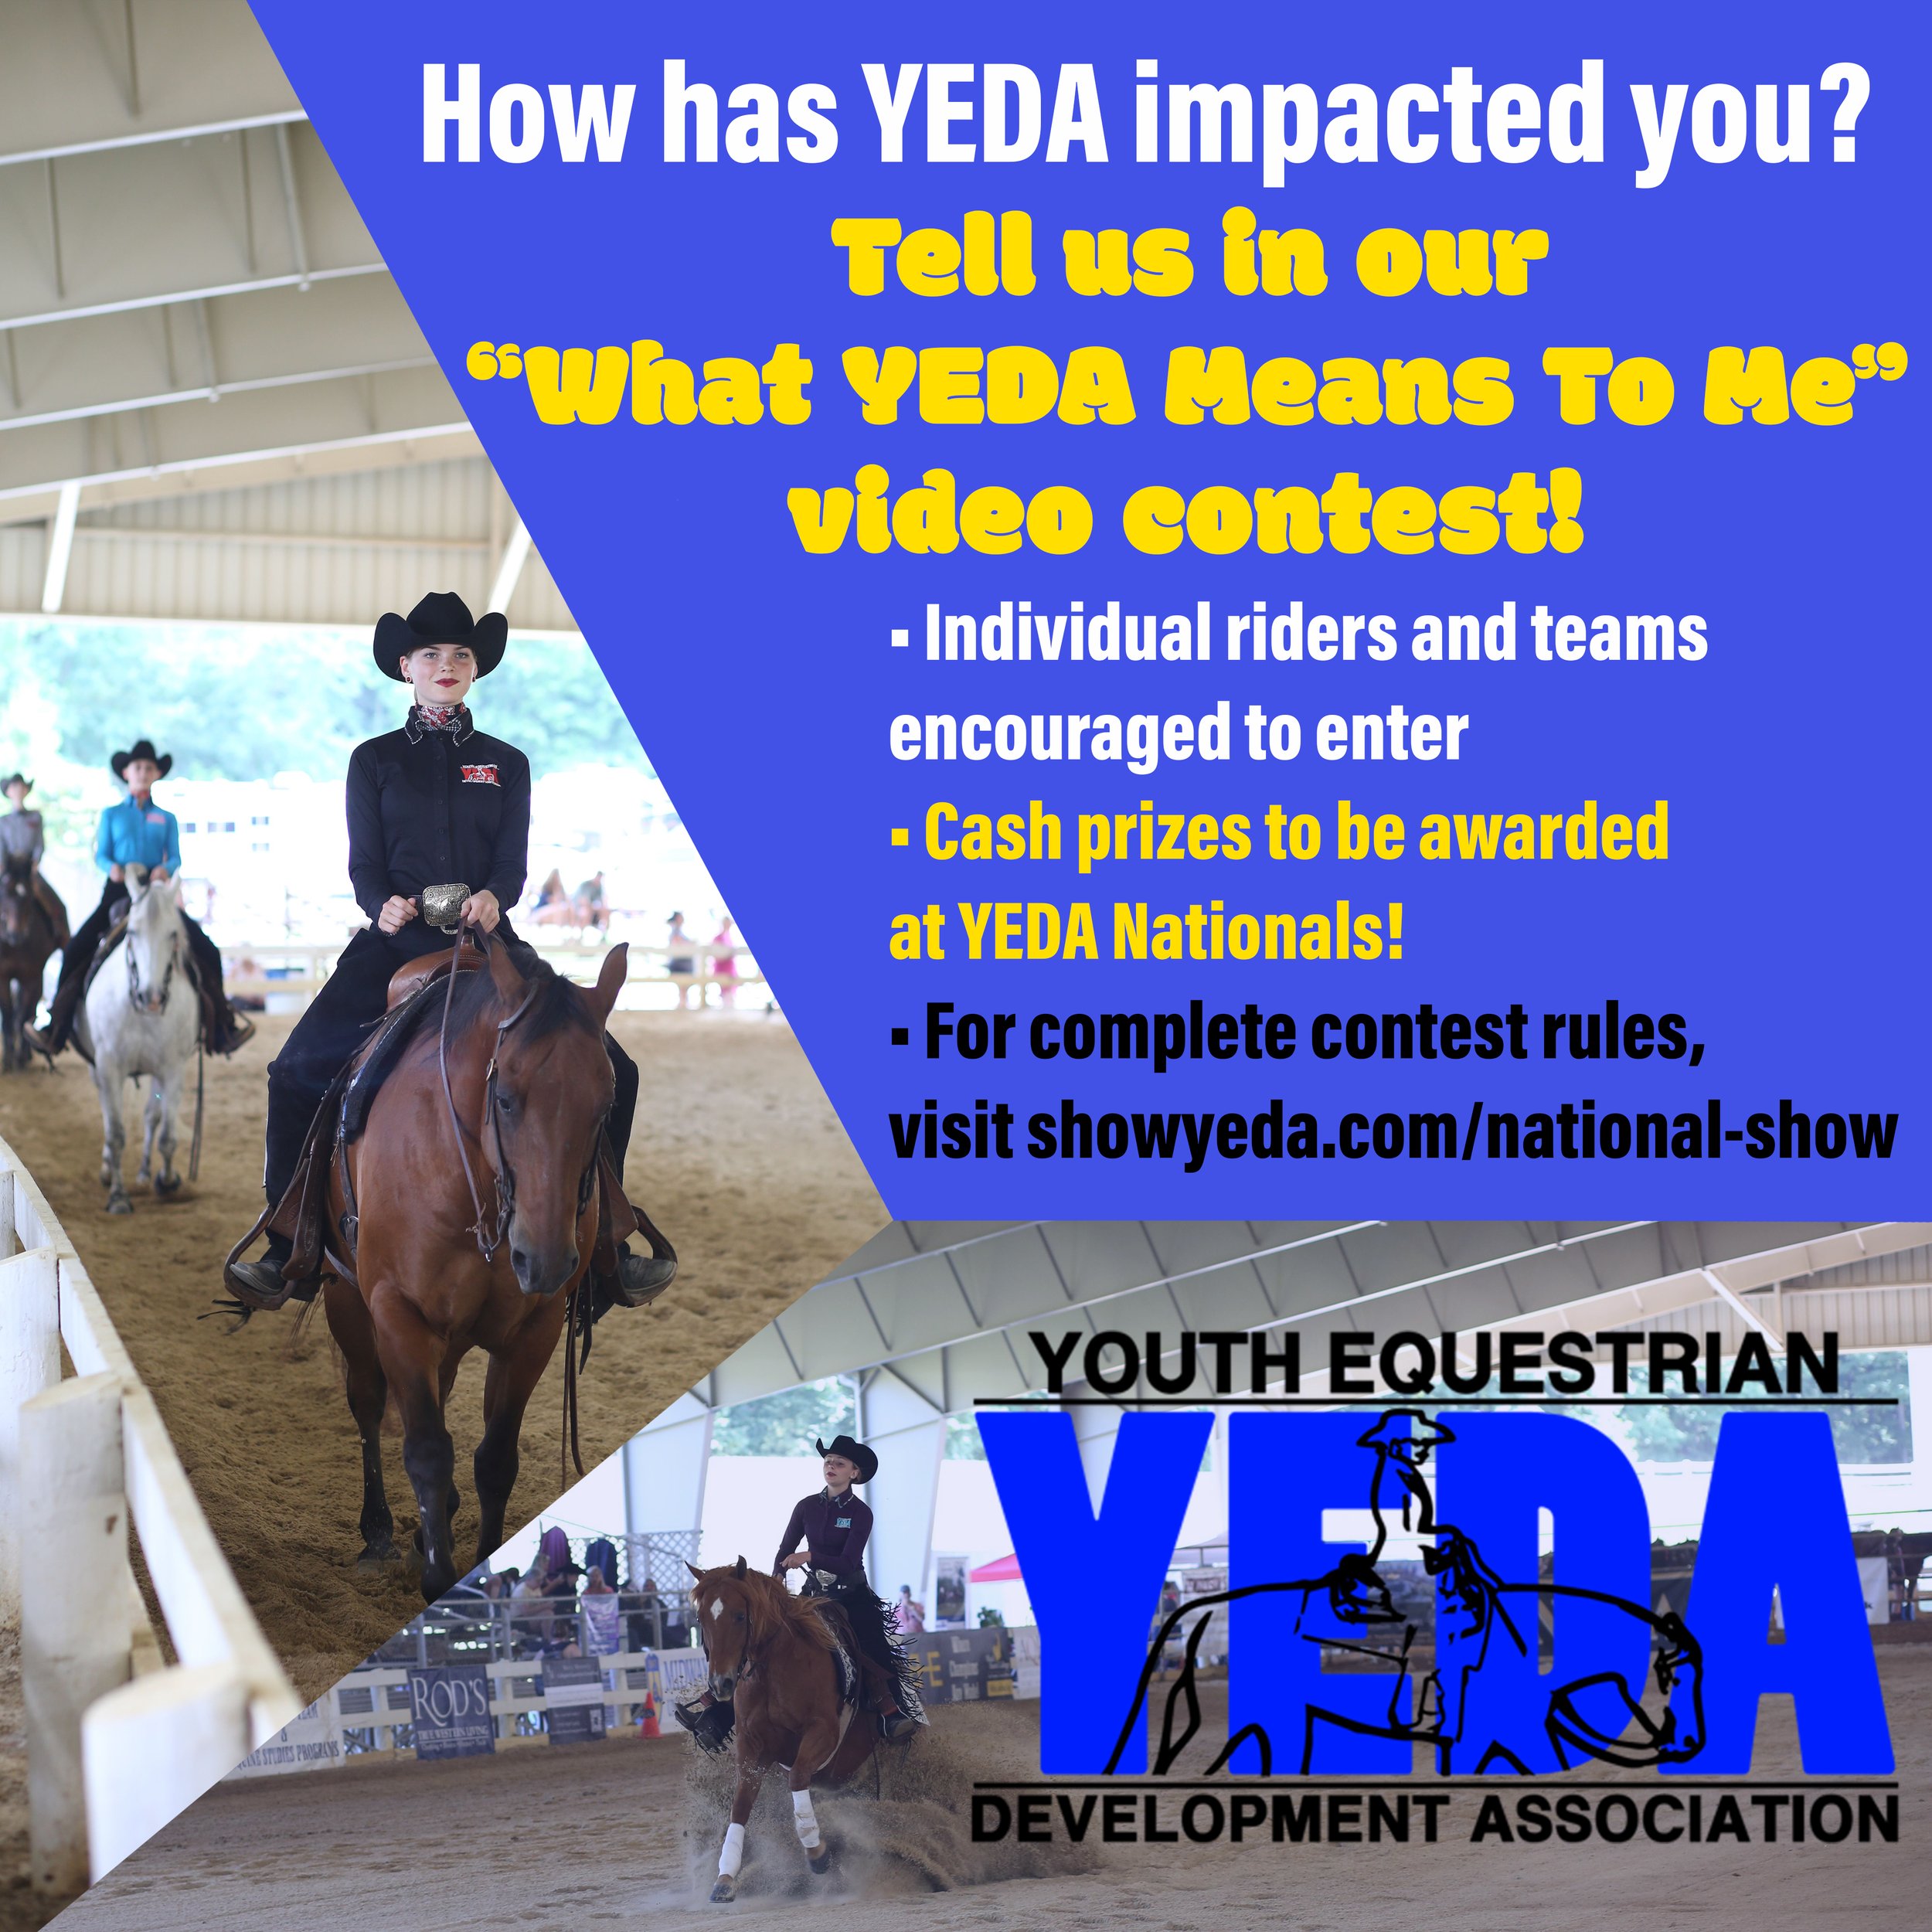 %22What YEDA Means To Me%22 Social Media Graphic 1.jpg